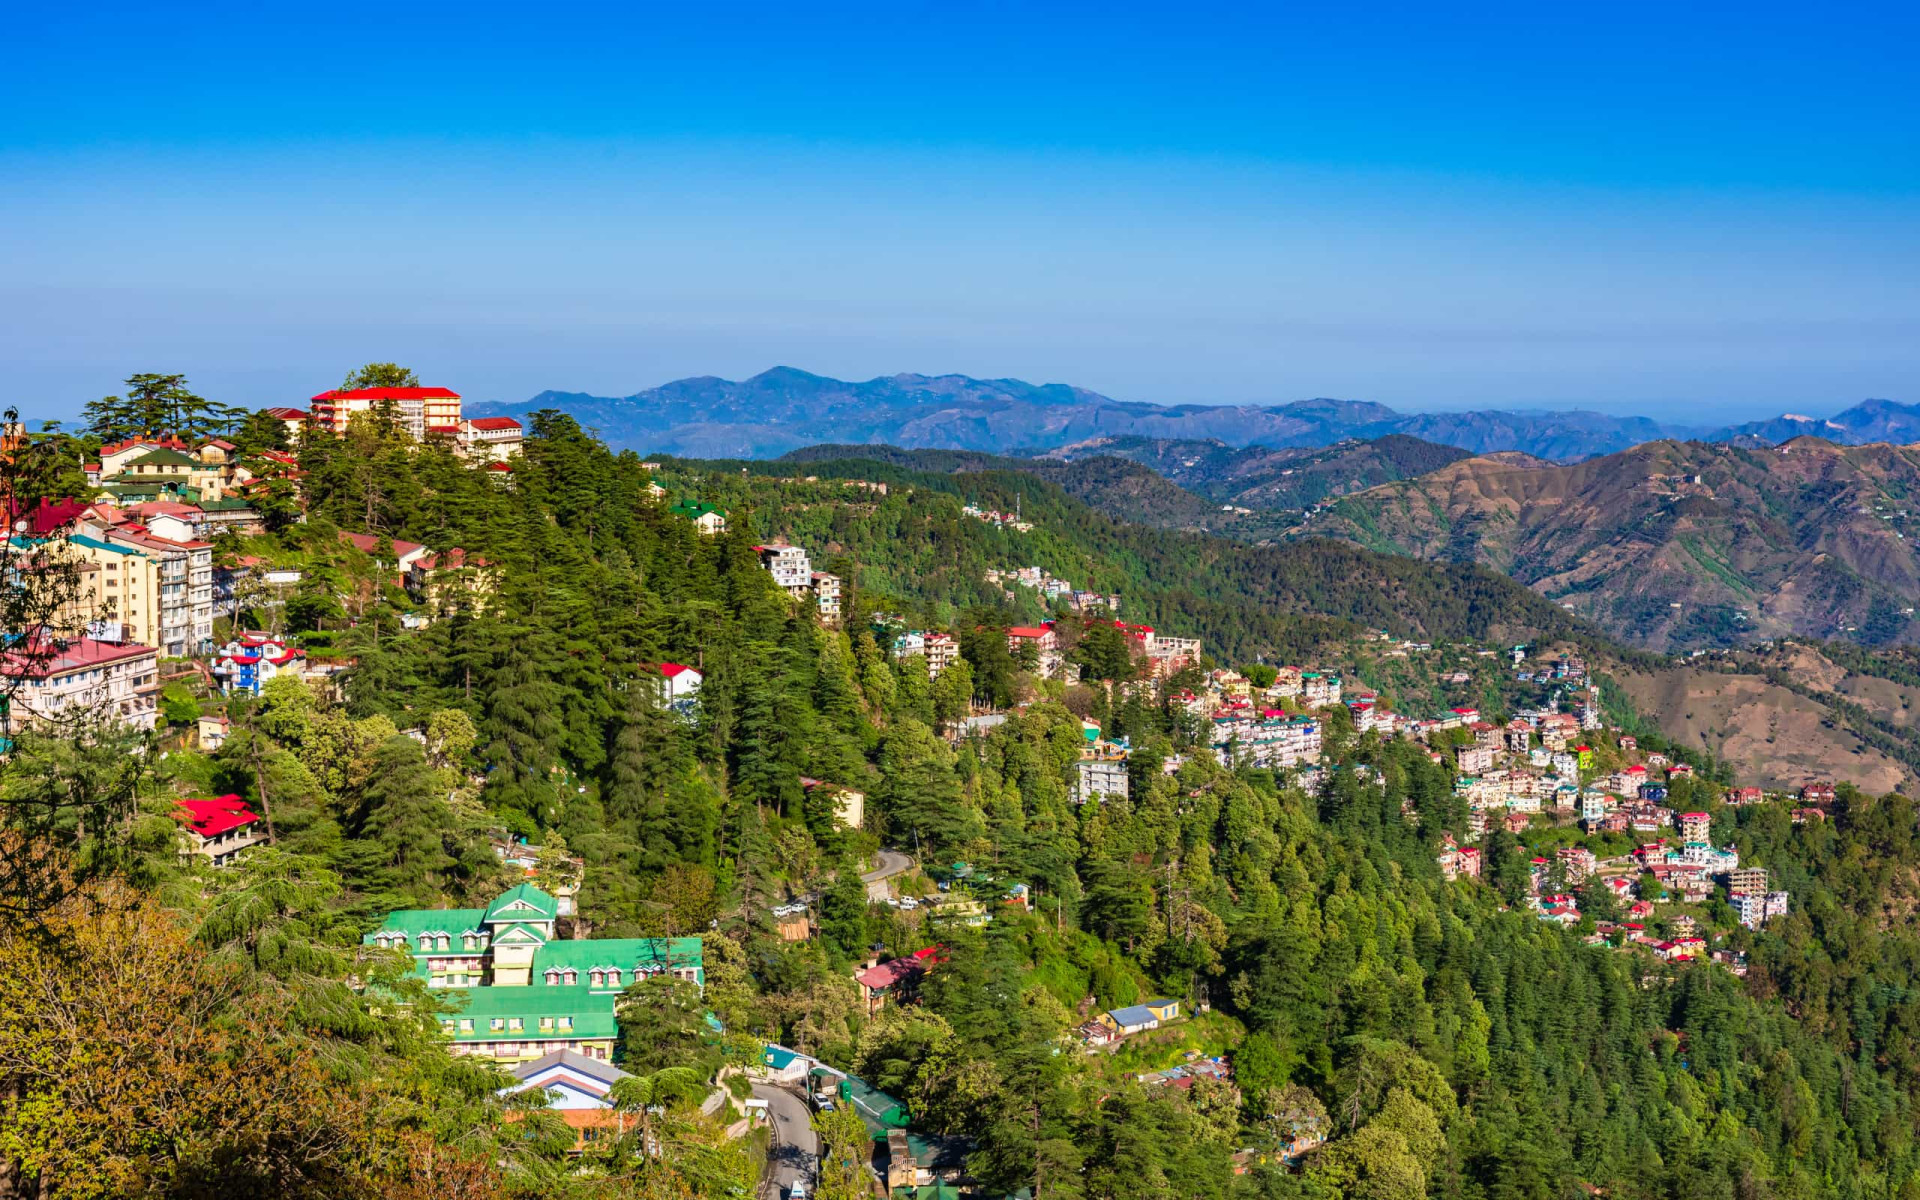 <p>Shimla is arguably India's best-known hill station, not least because the city of Shimla is the capital of the northern state of Himachal Pradesh. Enjoying an elevation of around 2,000 m (6,561 ft), the hill station serves as a welcome retreat from the soaring temperatures of the plains below, fanned as it is by cool, fresh air.</p>